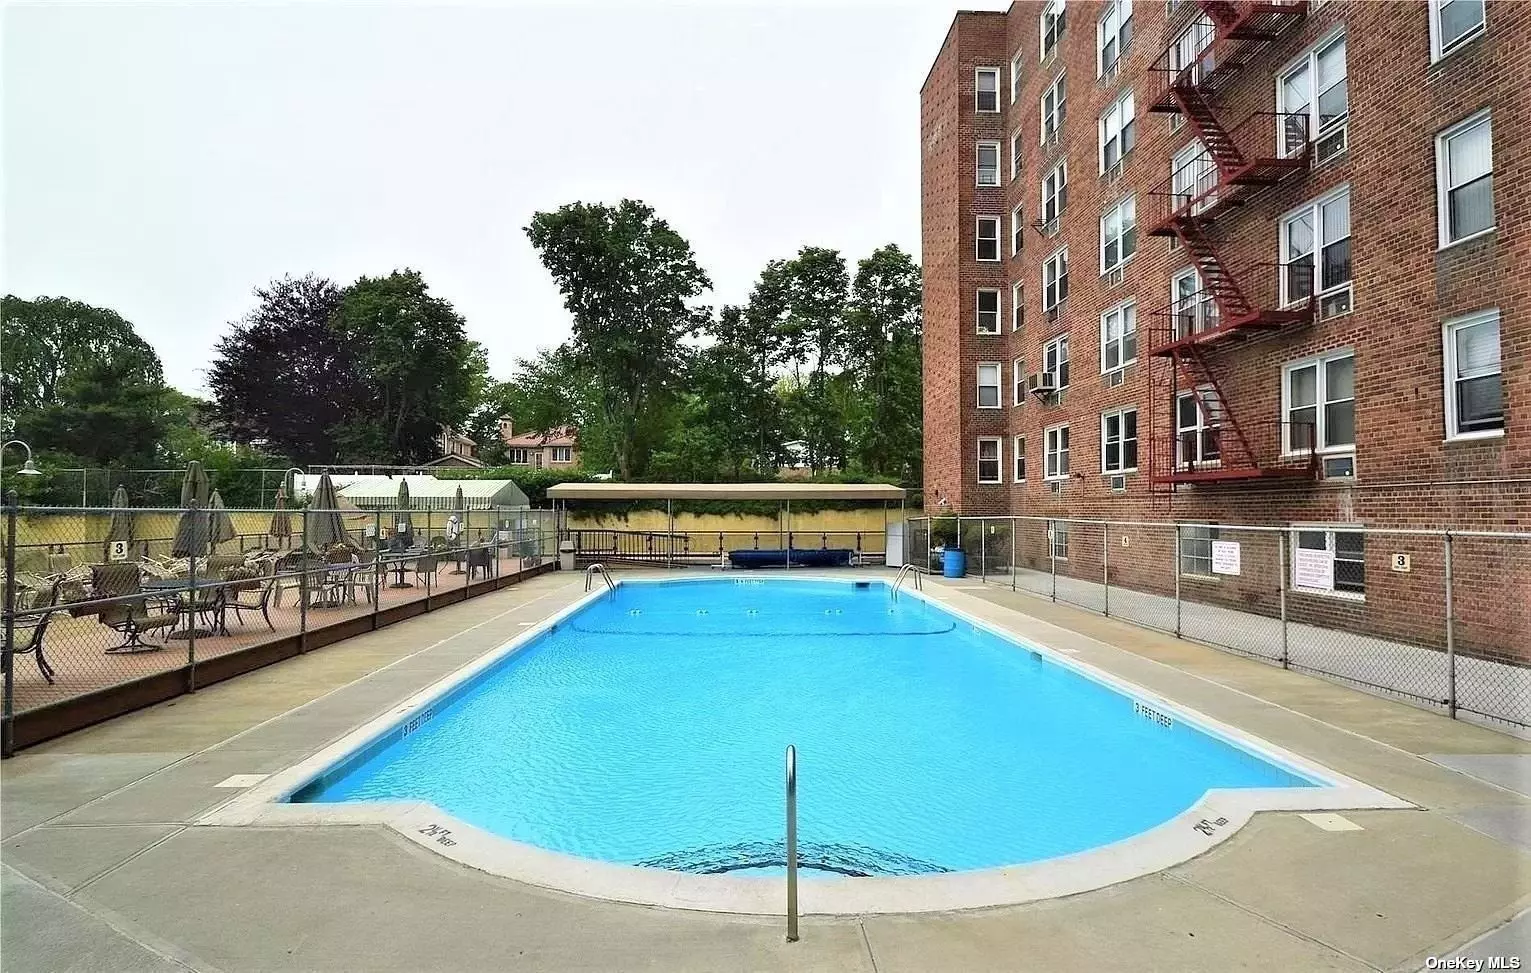 VALERIE ARMS CO-OP APTS. PEACE & TRANQUILITY AT HOME. EXTREMELY CONVENIENT ACCESS TO ALL (SHOPS, PARK, LIE/ GCPKWY) THE BEST SCHOOL DISTRICT IN NYC. 2 BEDROOMS, 1 BATHROOM WITH OUTDOOR PARKING, POOL & FITNESS CENTER.